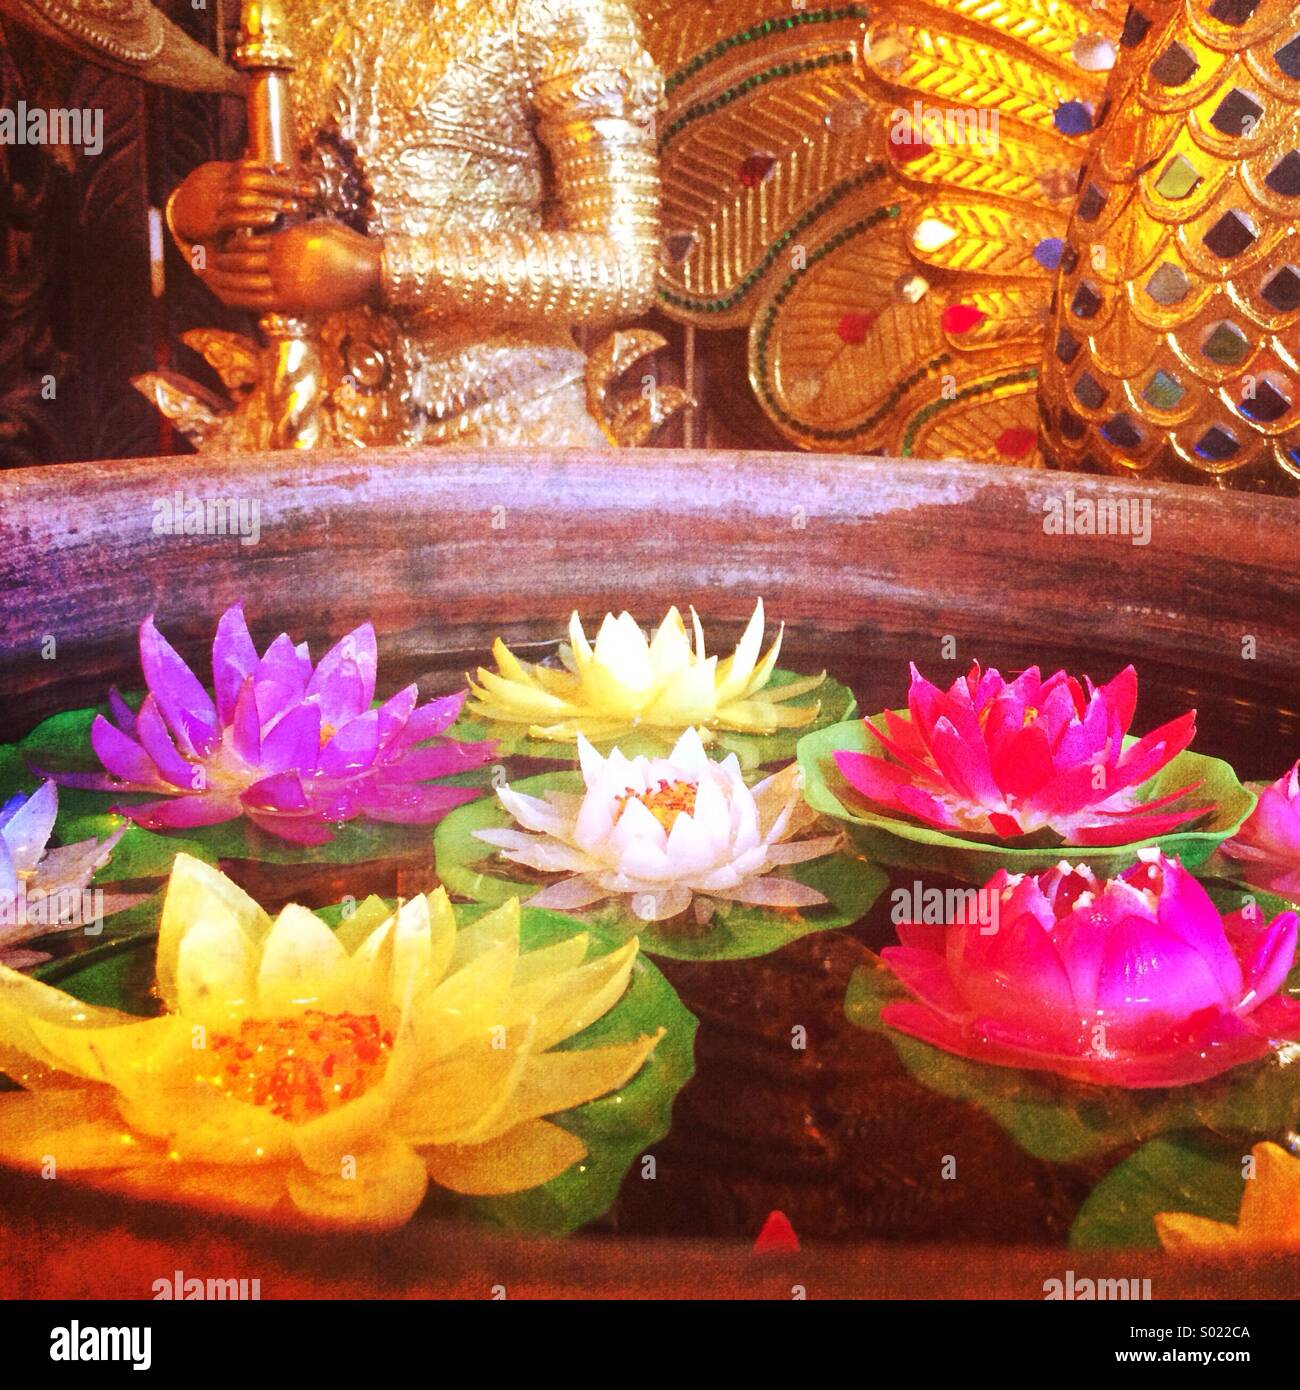 Colorful lotus flowers float in water in front of golden Asian figurines Stock Photo